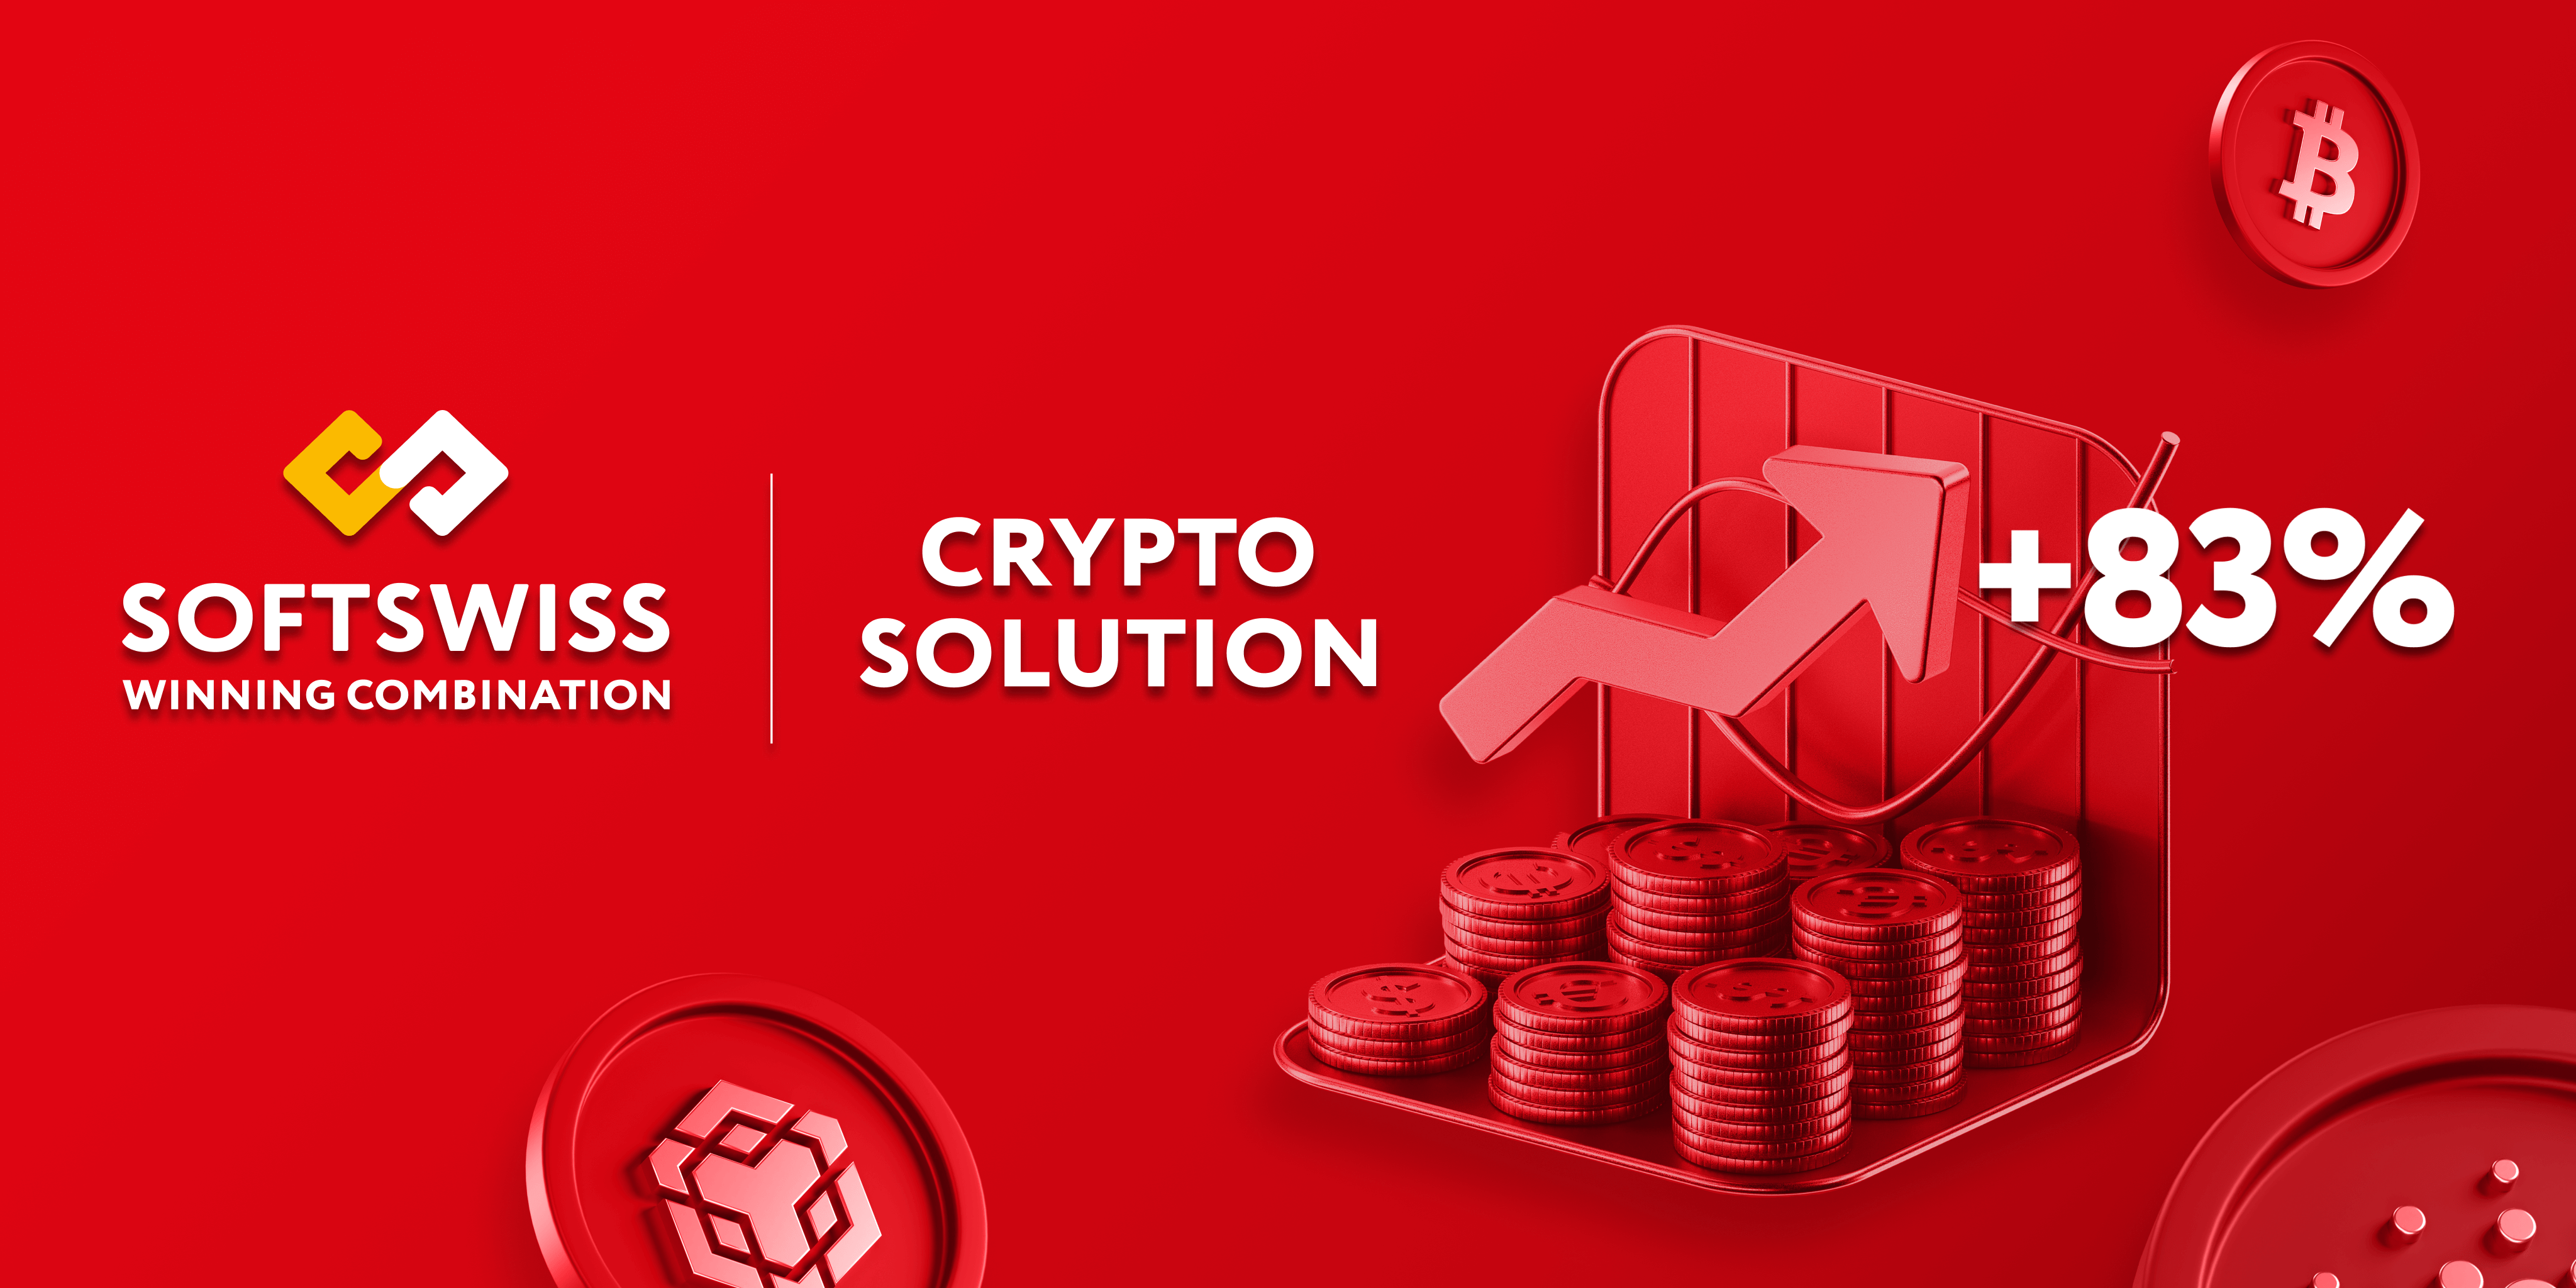 83% Crypto Growth: SOFTSWISS Reveals iGaming Insights